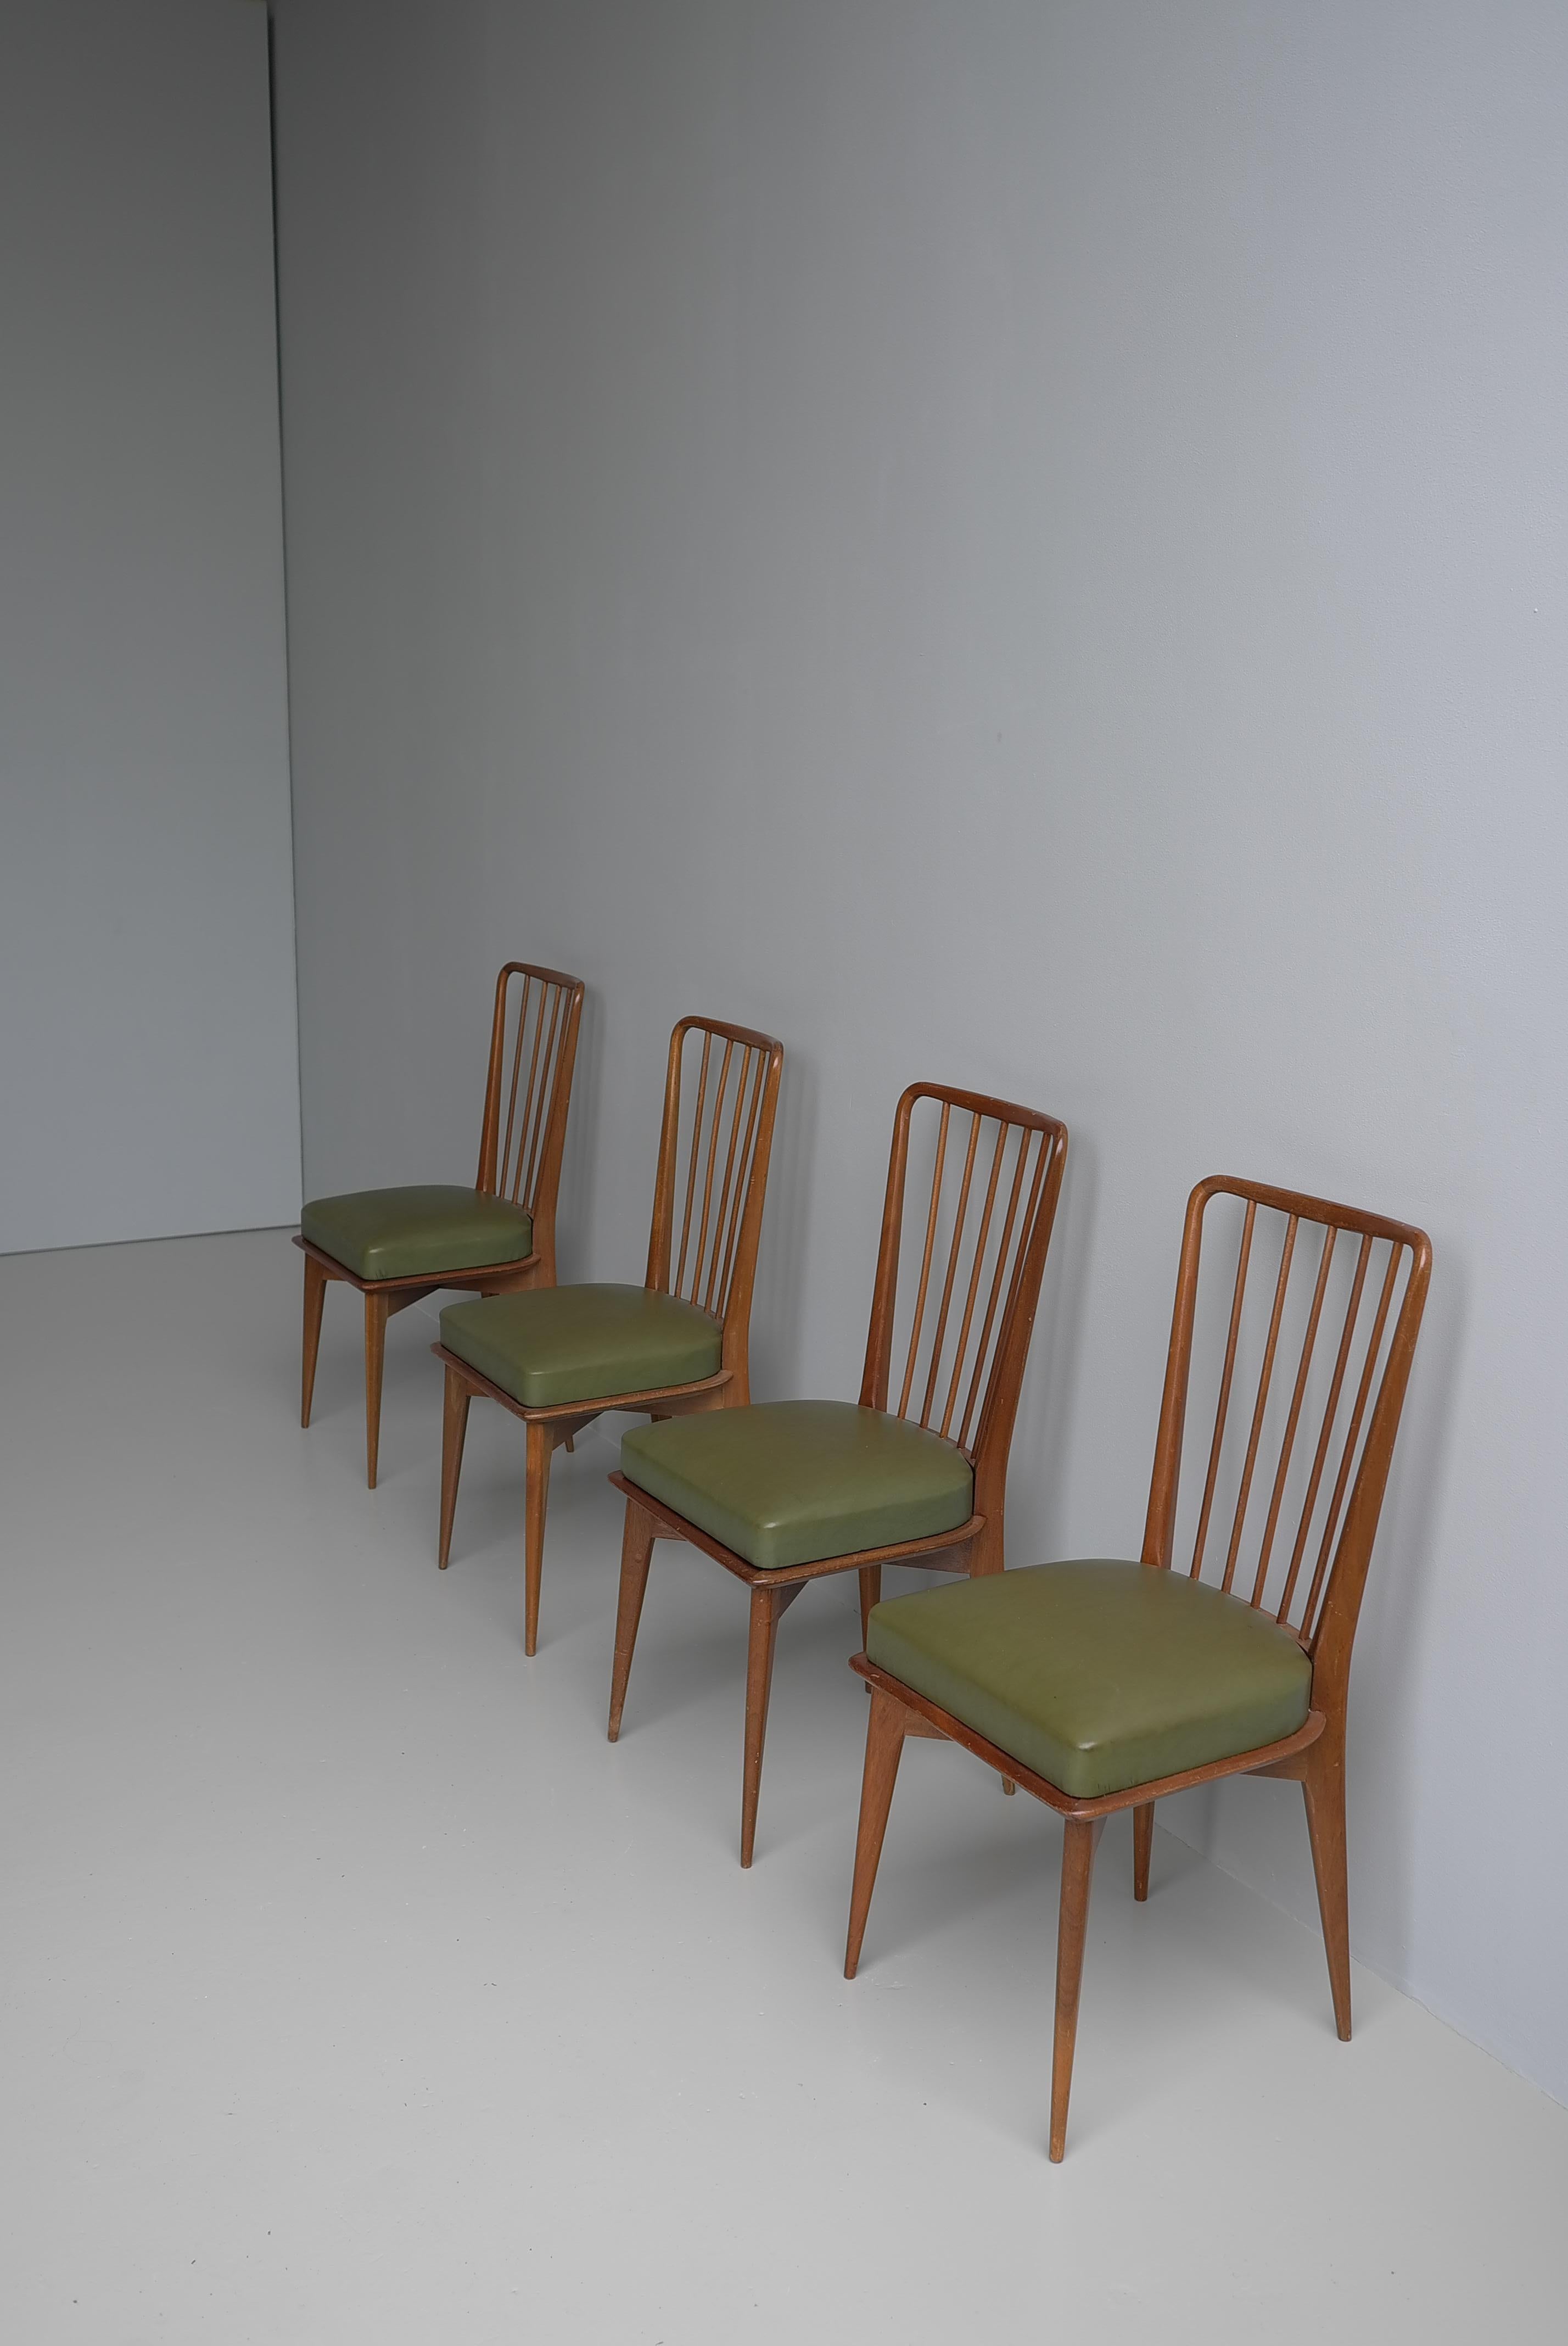 Four Chairs by Charles Ramos, Édition Castellaneta, France 1960 With the original Green upholstery.